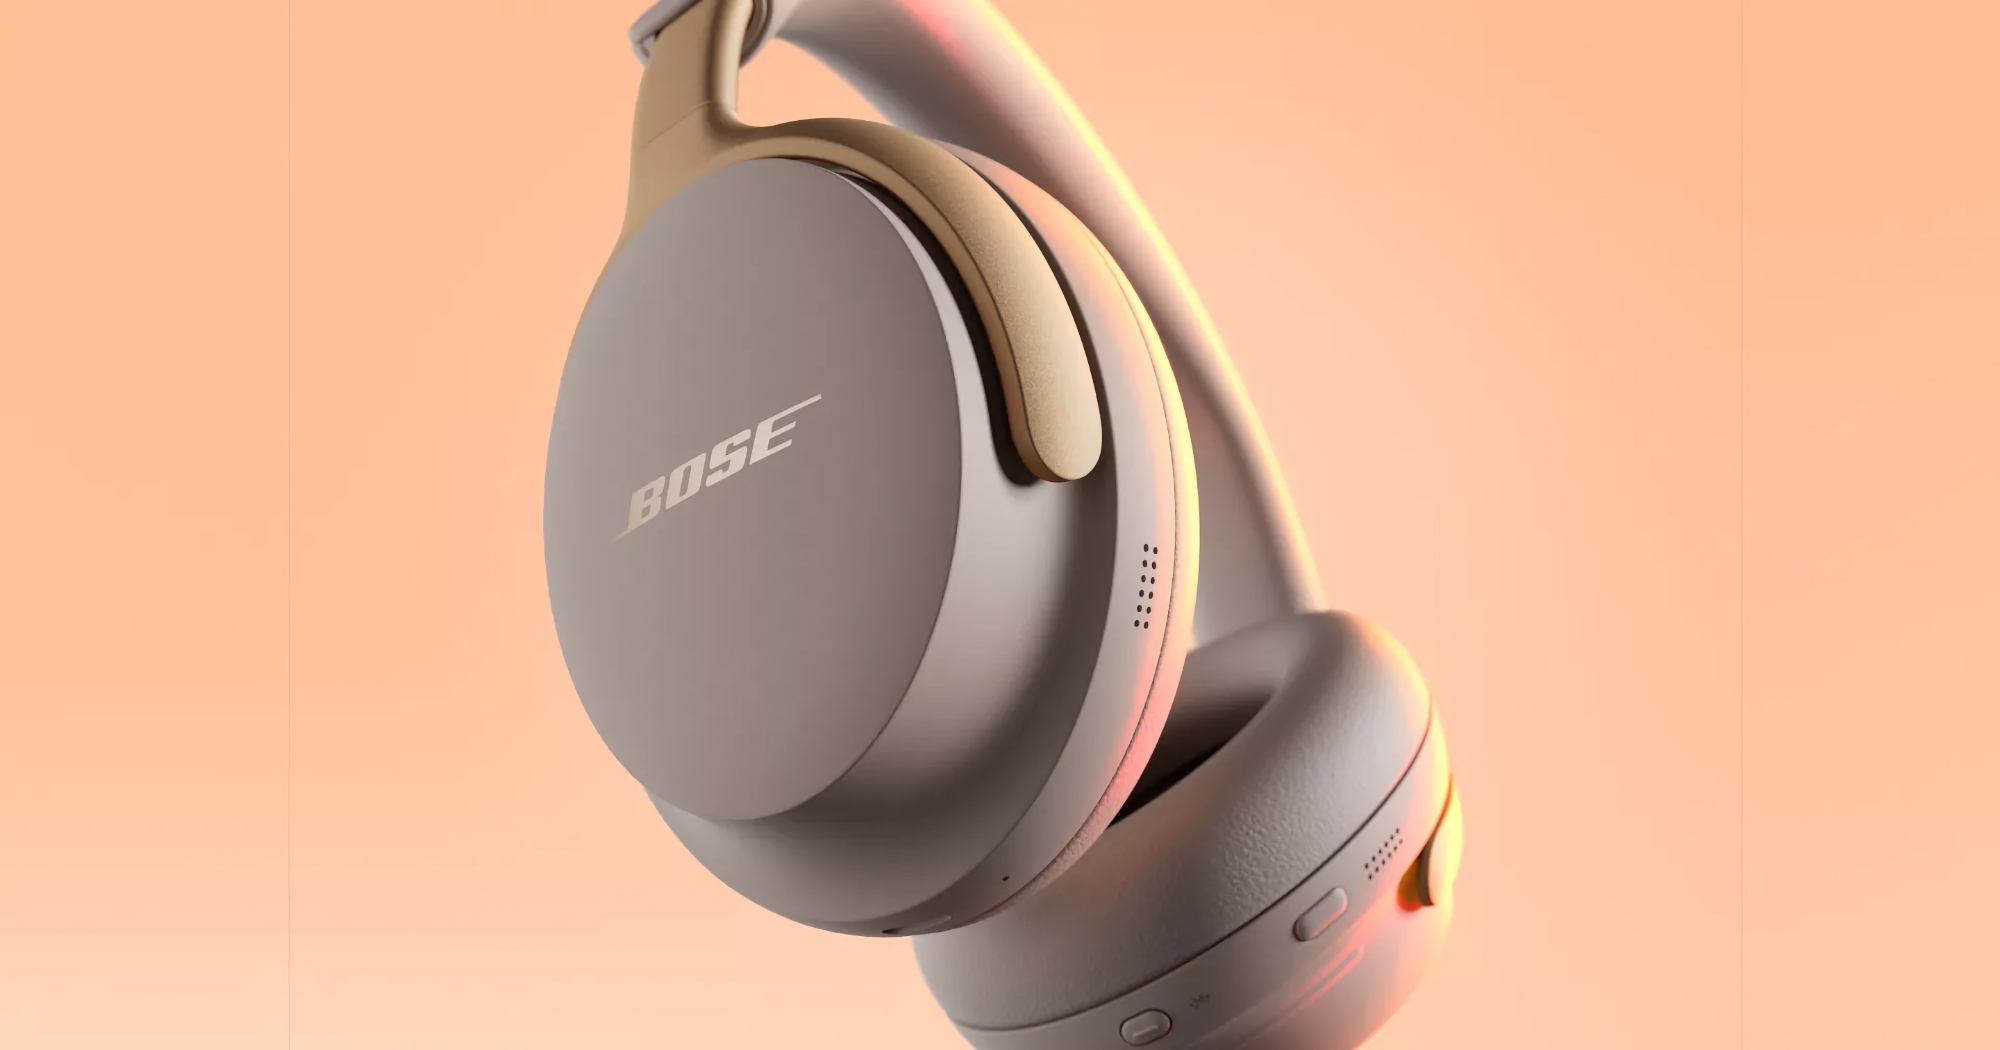 The Bose QuietComfort Ultra flagship headphones with ANC are available on Amazon for $50 off